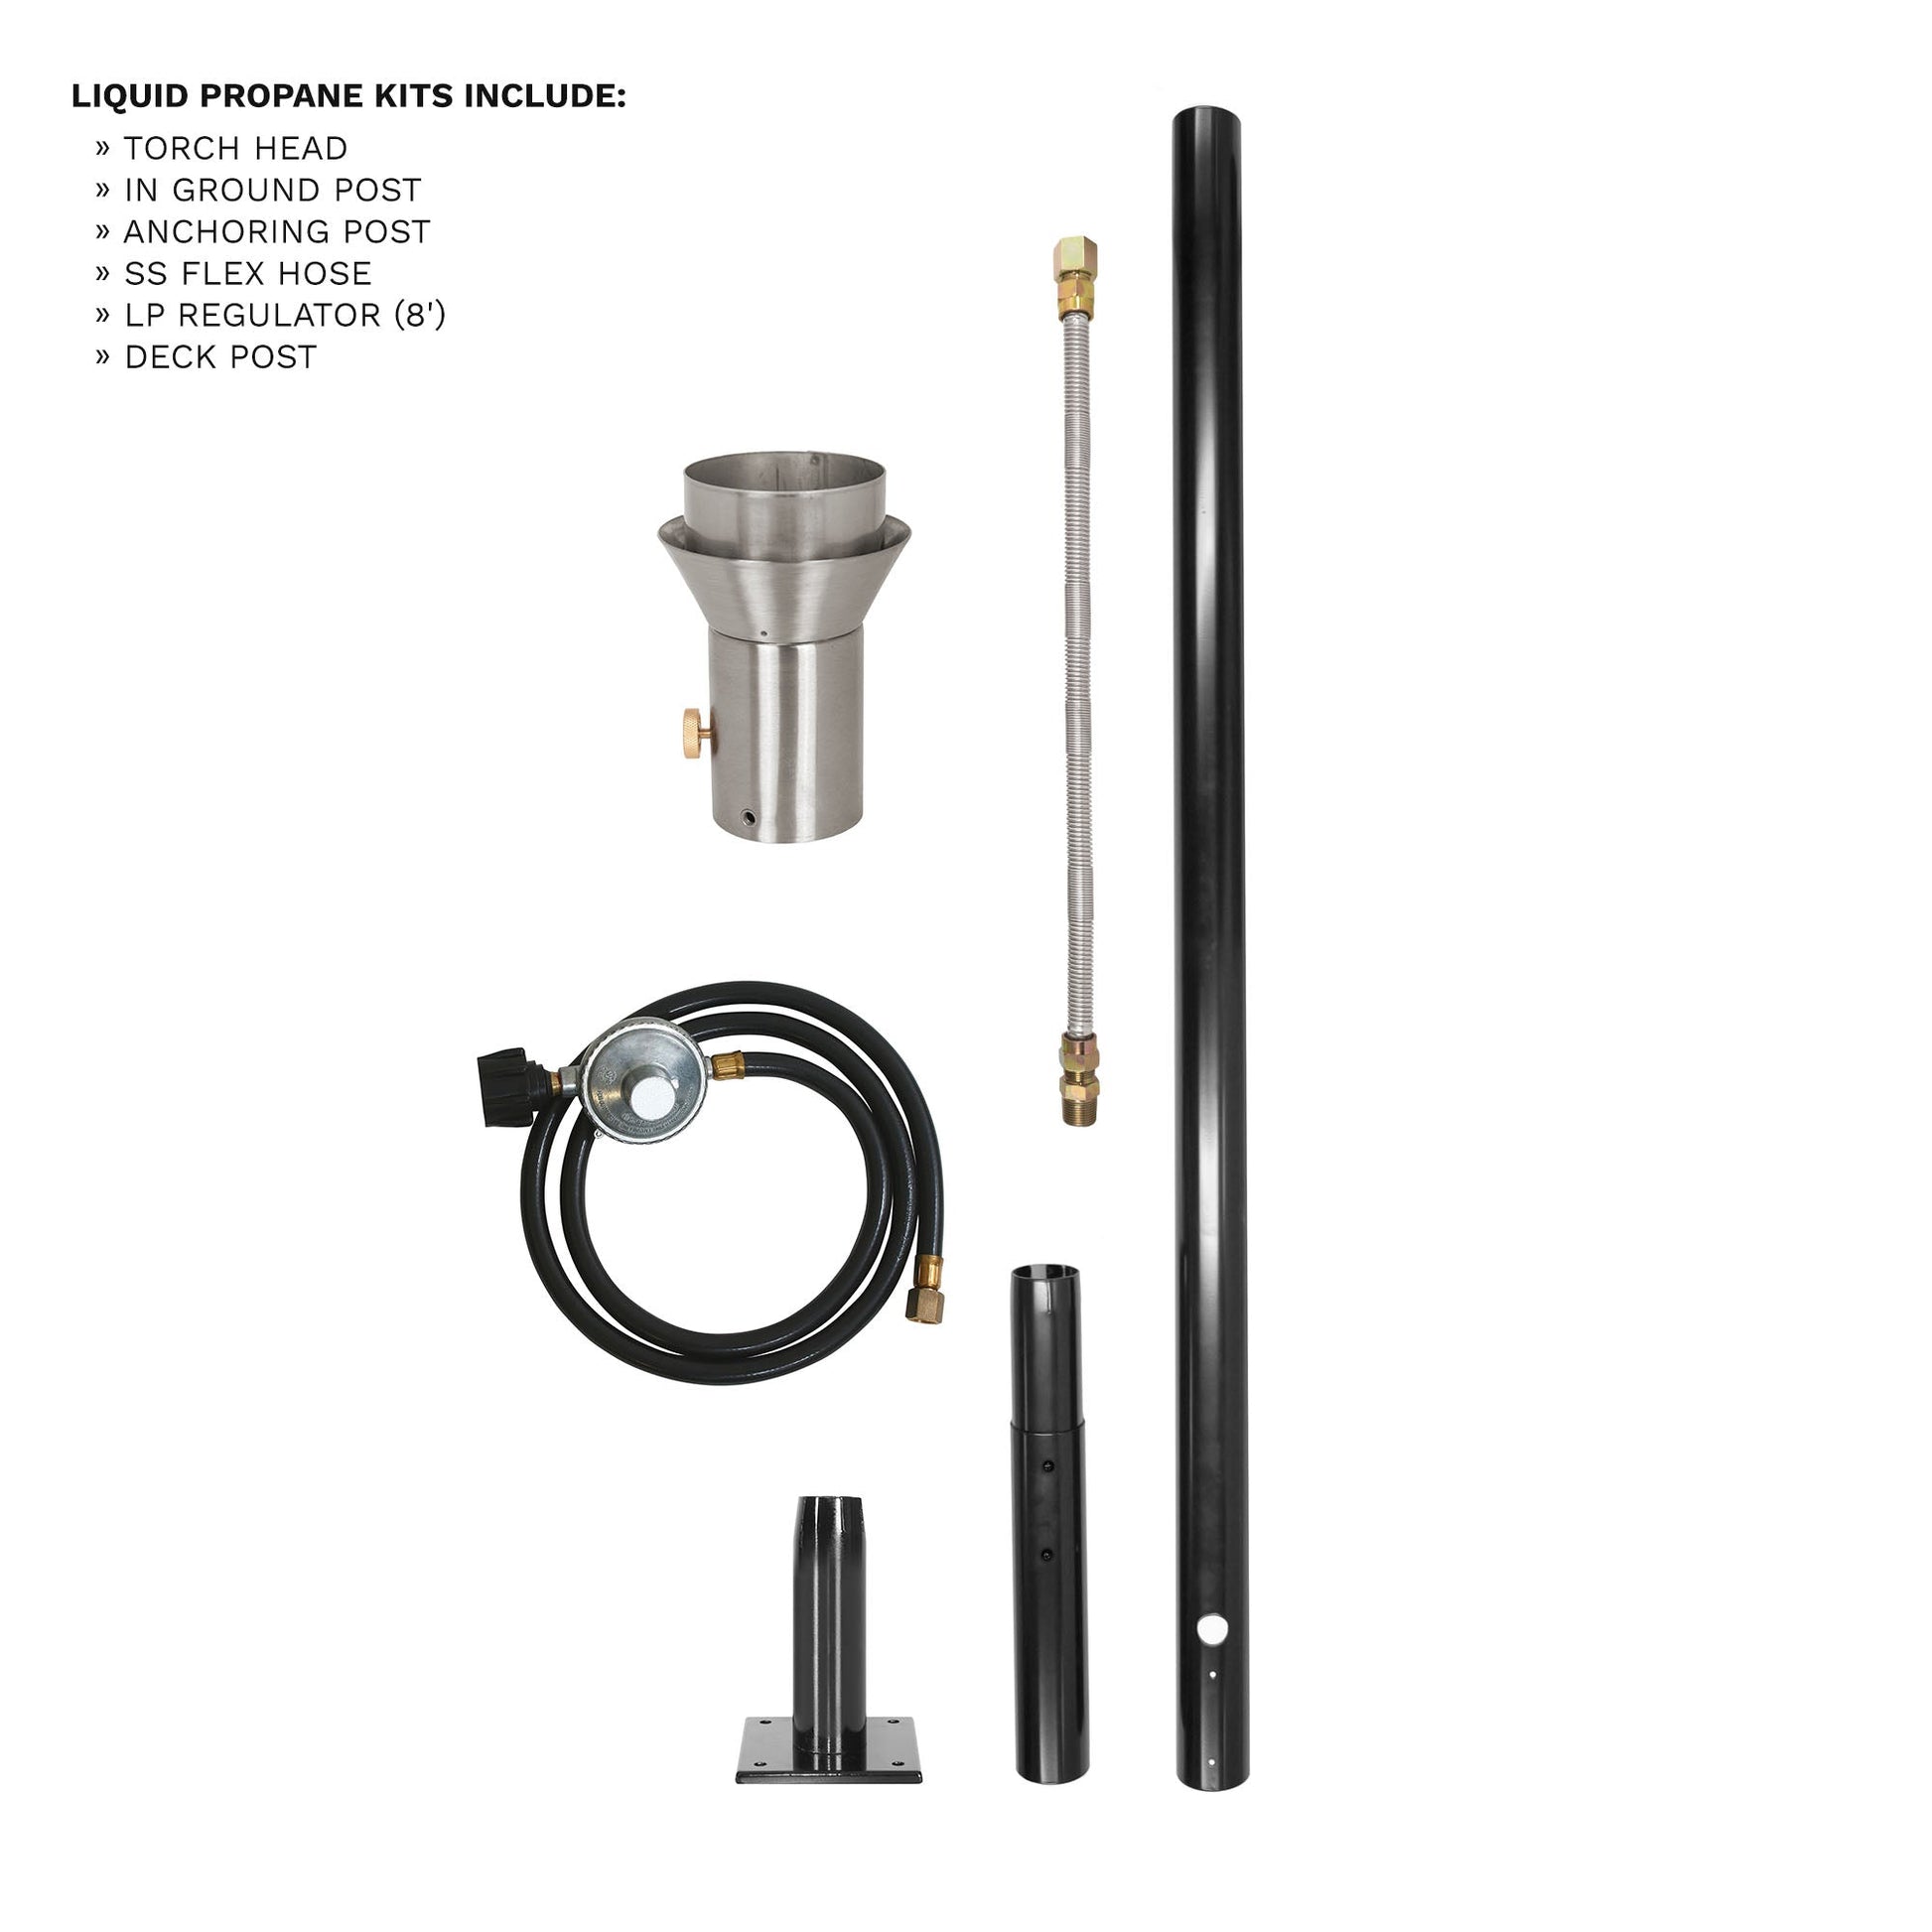 Woven Original TOP Torch & Post Complete Kit - Stainless Steel - Liquid Propane-Novel Home